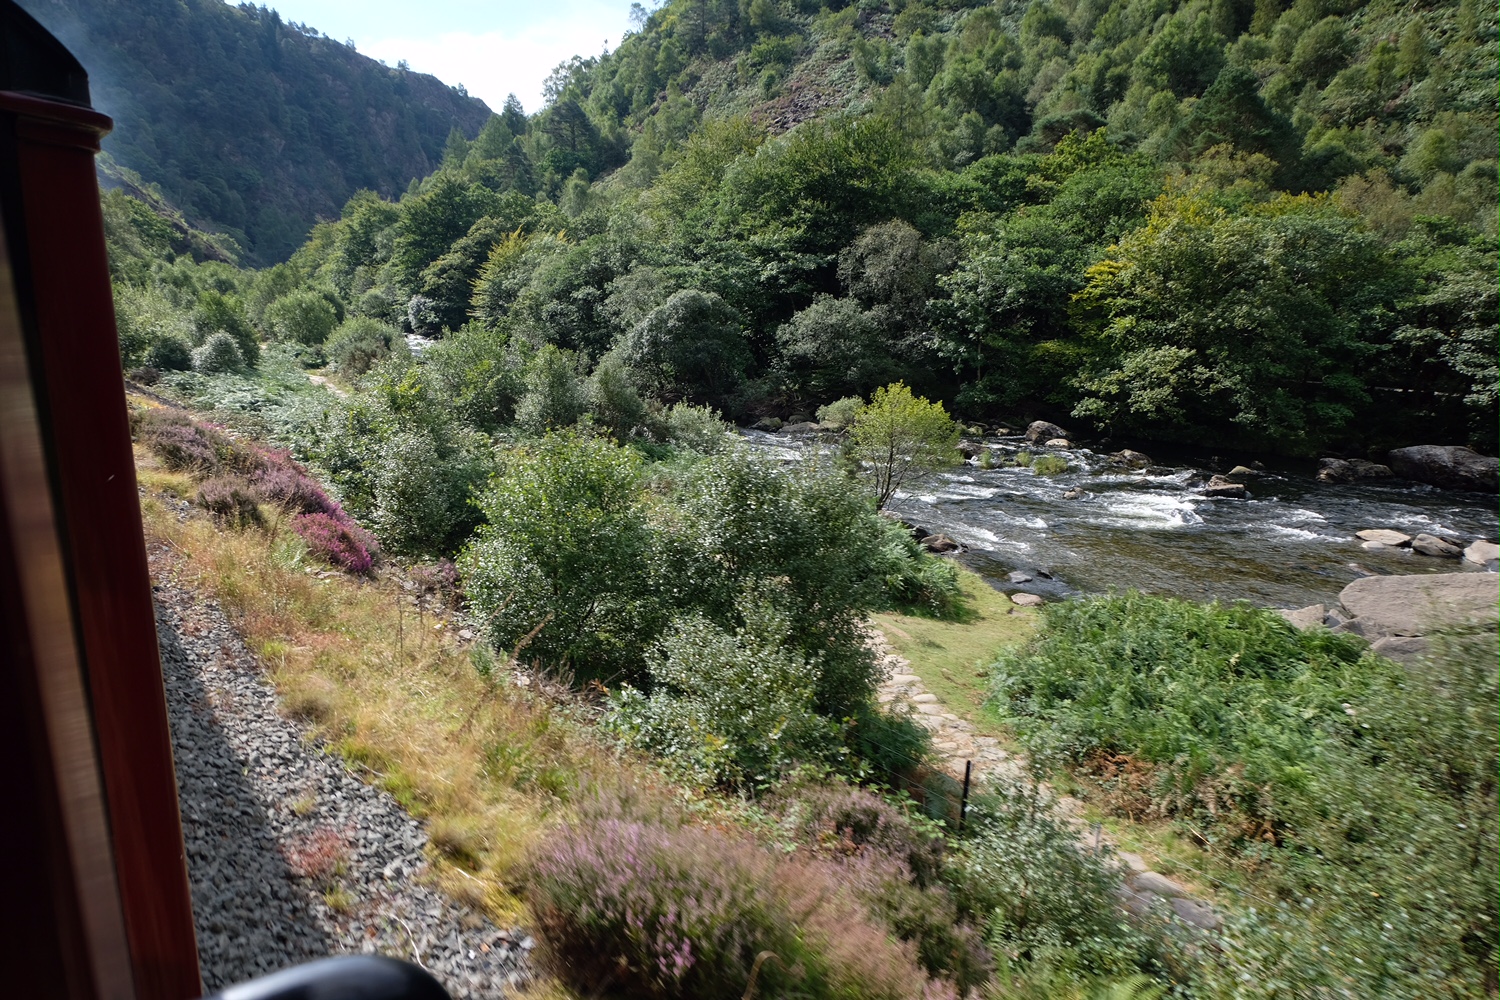 Great Little Trains of Wales: Aberglaslyn Gorge. Voted by National Trust members as their favourite view in Britain.